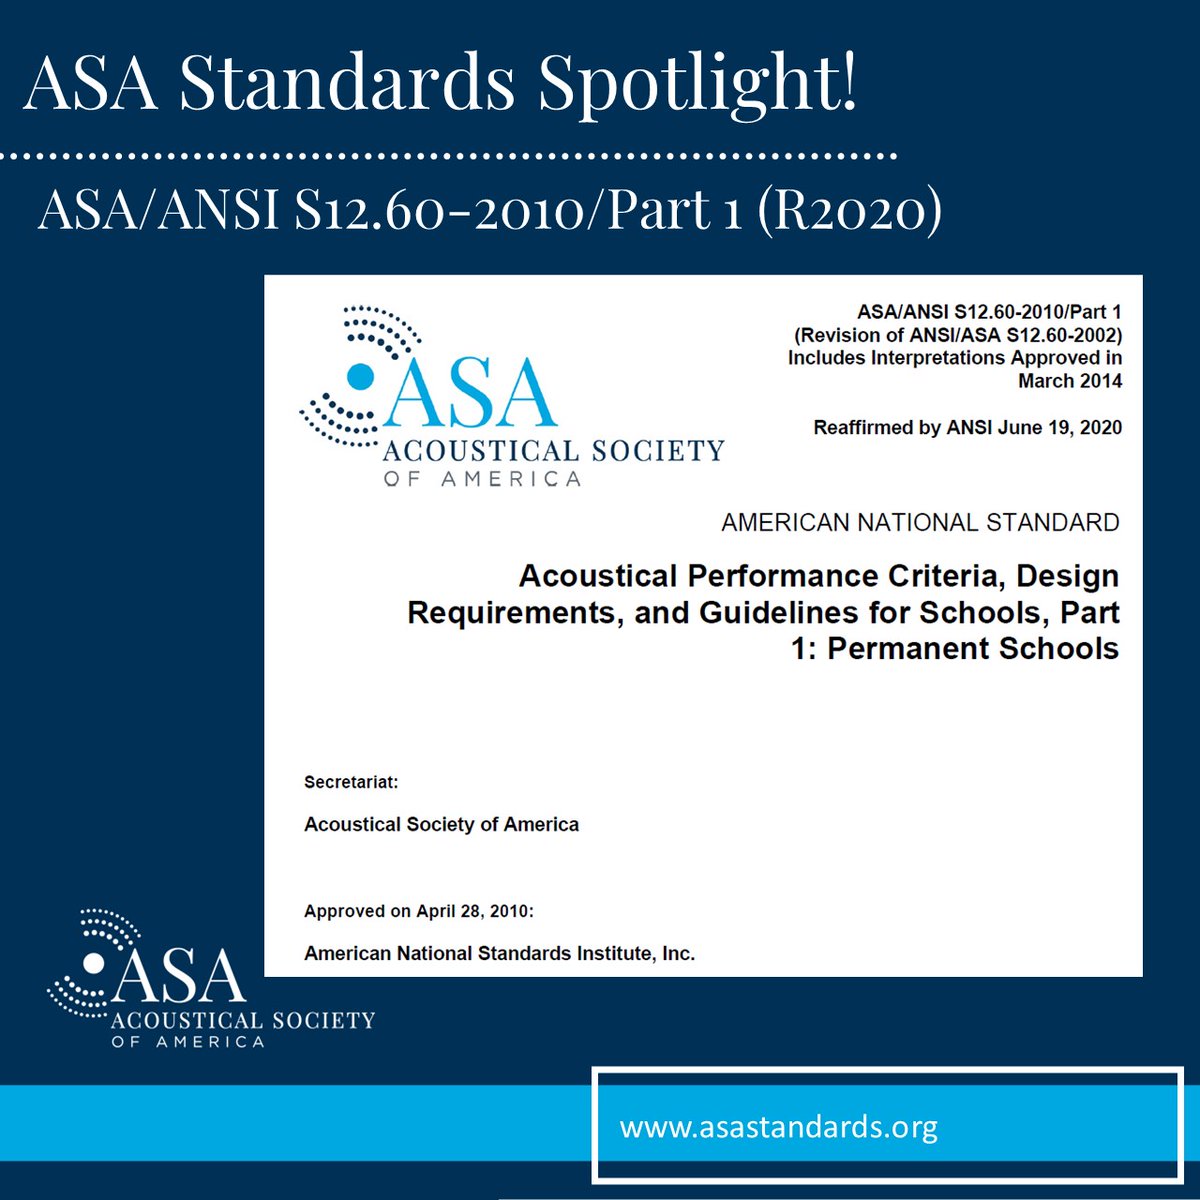 Today's #ASAStandards Spotlight (ASA/ANSI S12.60-2010/Part 1 (R2020)) focuses on #acoustical performance criteria and design requirements for #classrooms and other #learning spaces: bit.ly/3jPQKOd #Acoustics #K12 #Highered #BackgroundNoise #Reverberation